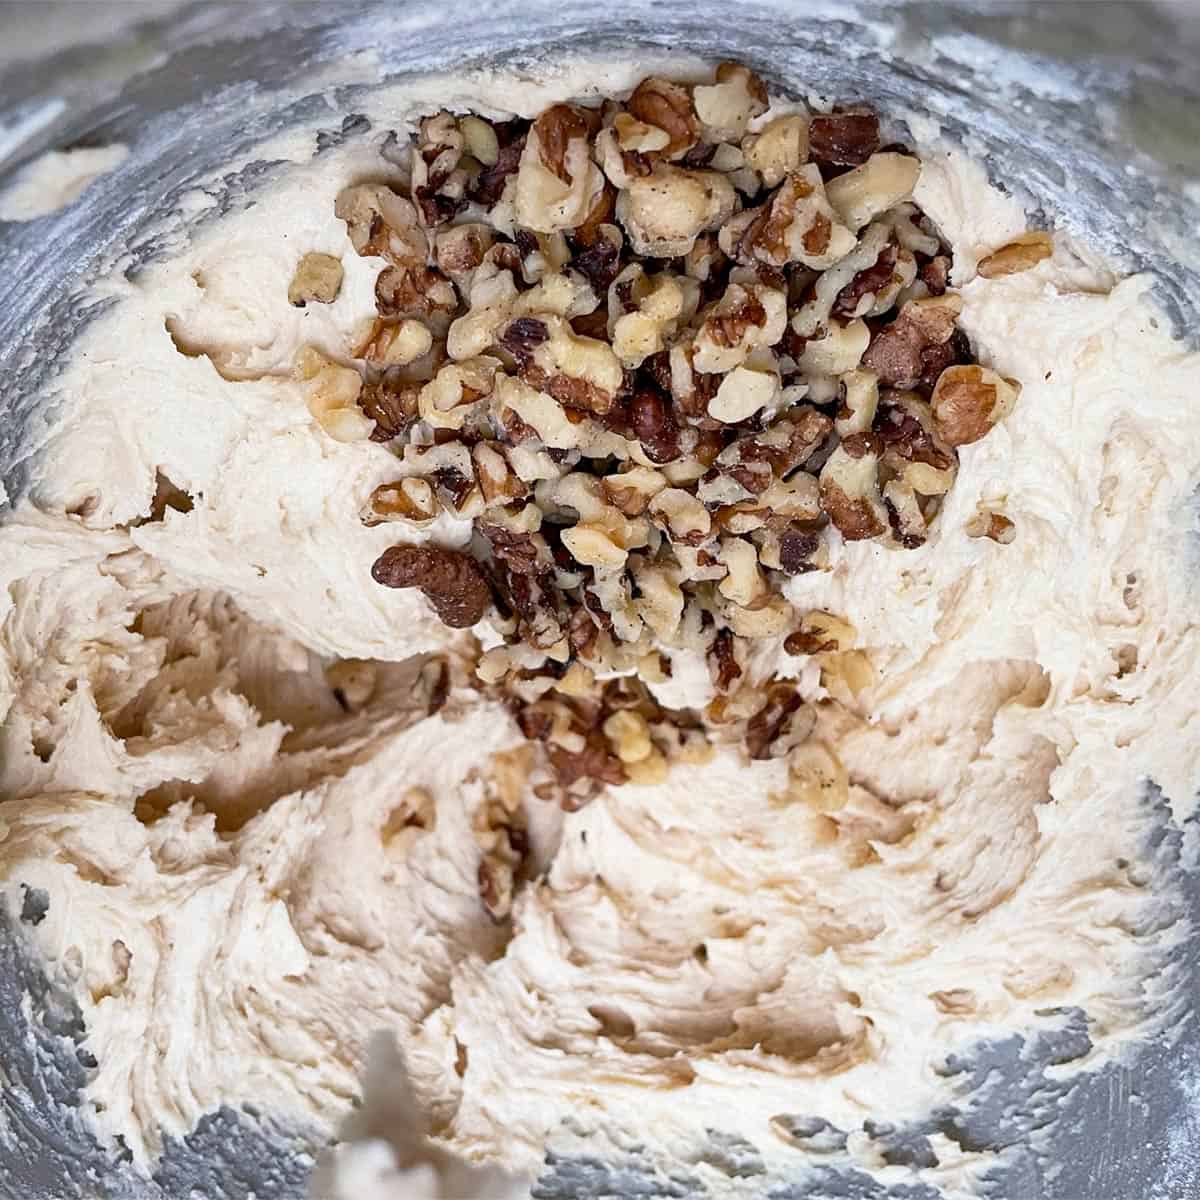 Adding the walnuts to the cookie dough.